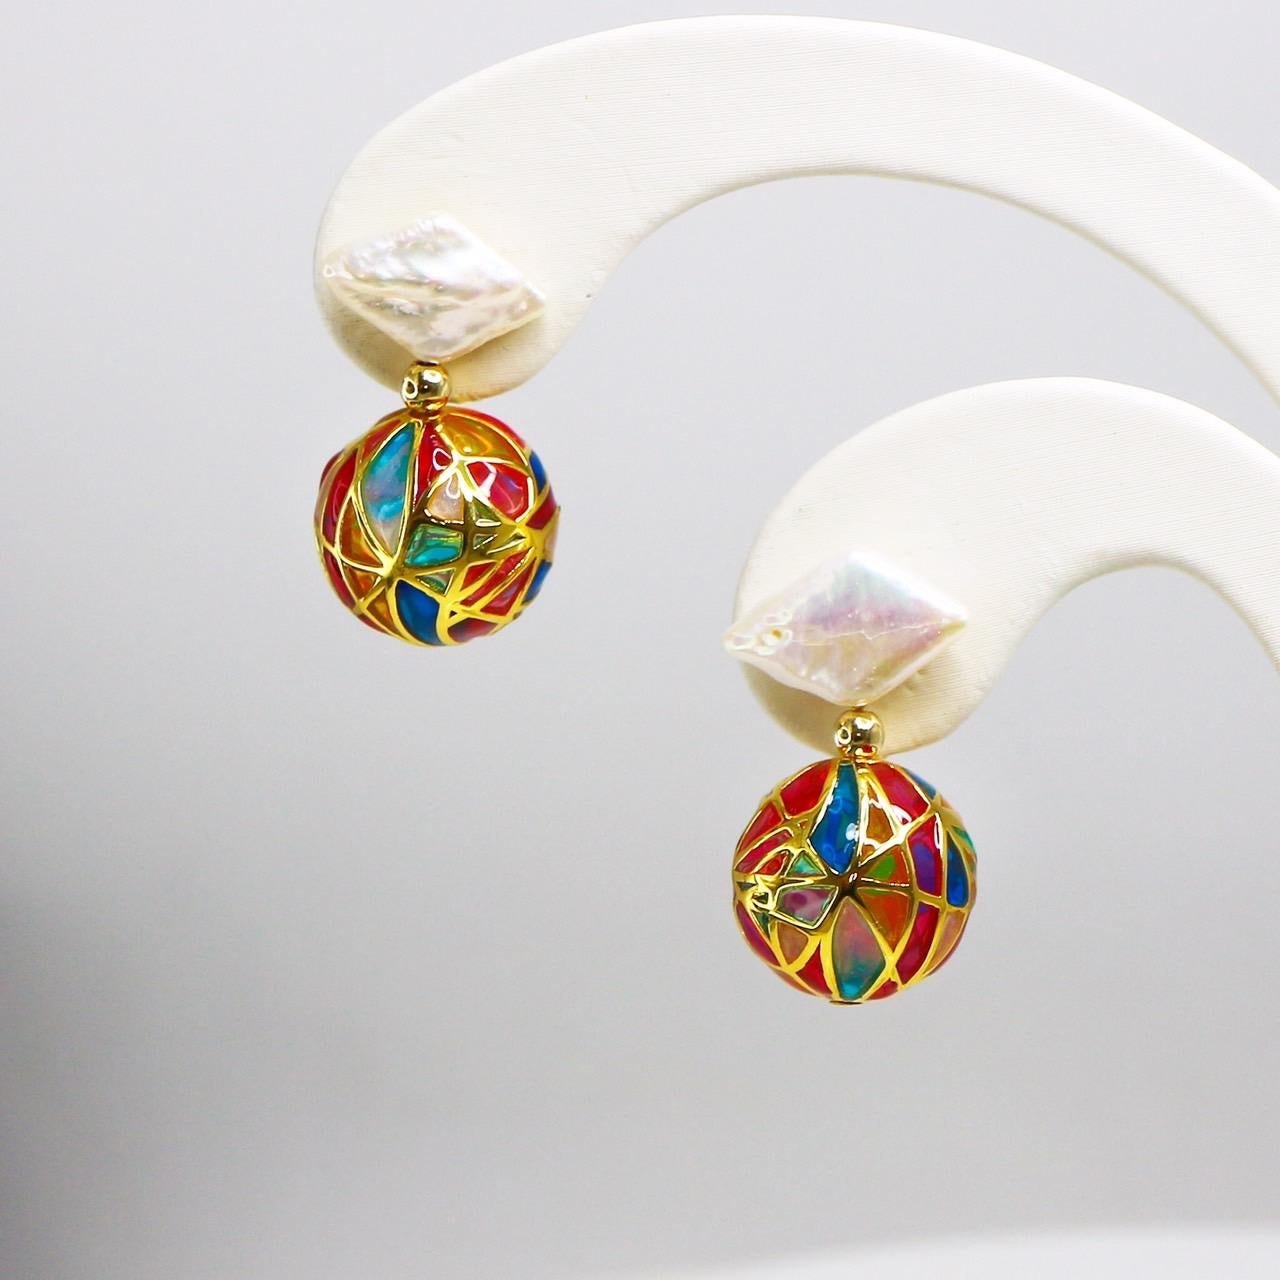 *925 Sterling Silver Hot Air Balloon Enamel Antique Stud Earrings*

Hot air balloon shape enamel on the yellow gold plated 925 sterling silver band with fine workmanship and enamel art. 

The earrings combine fashion and classic design ideas and are